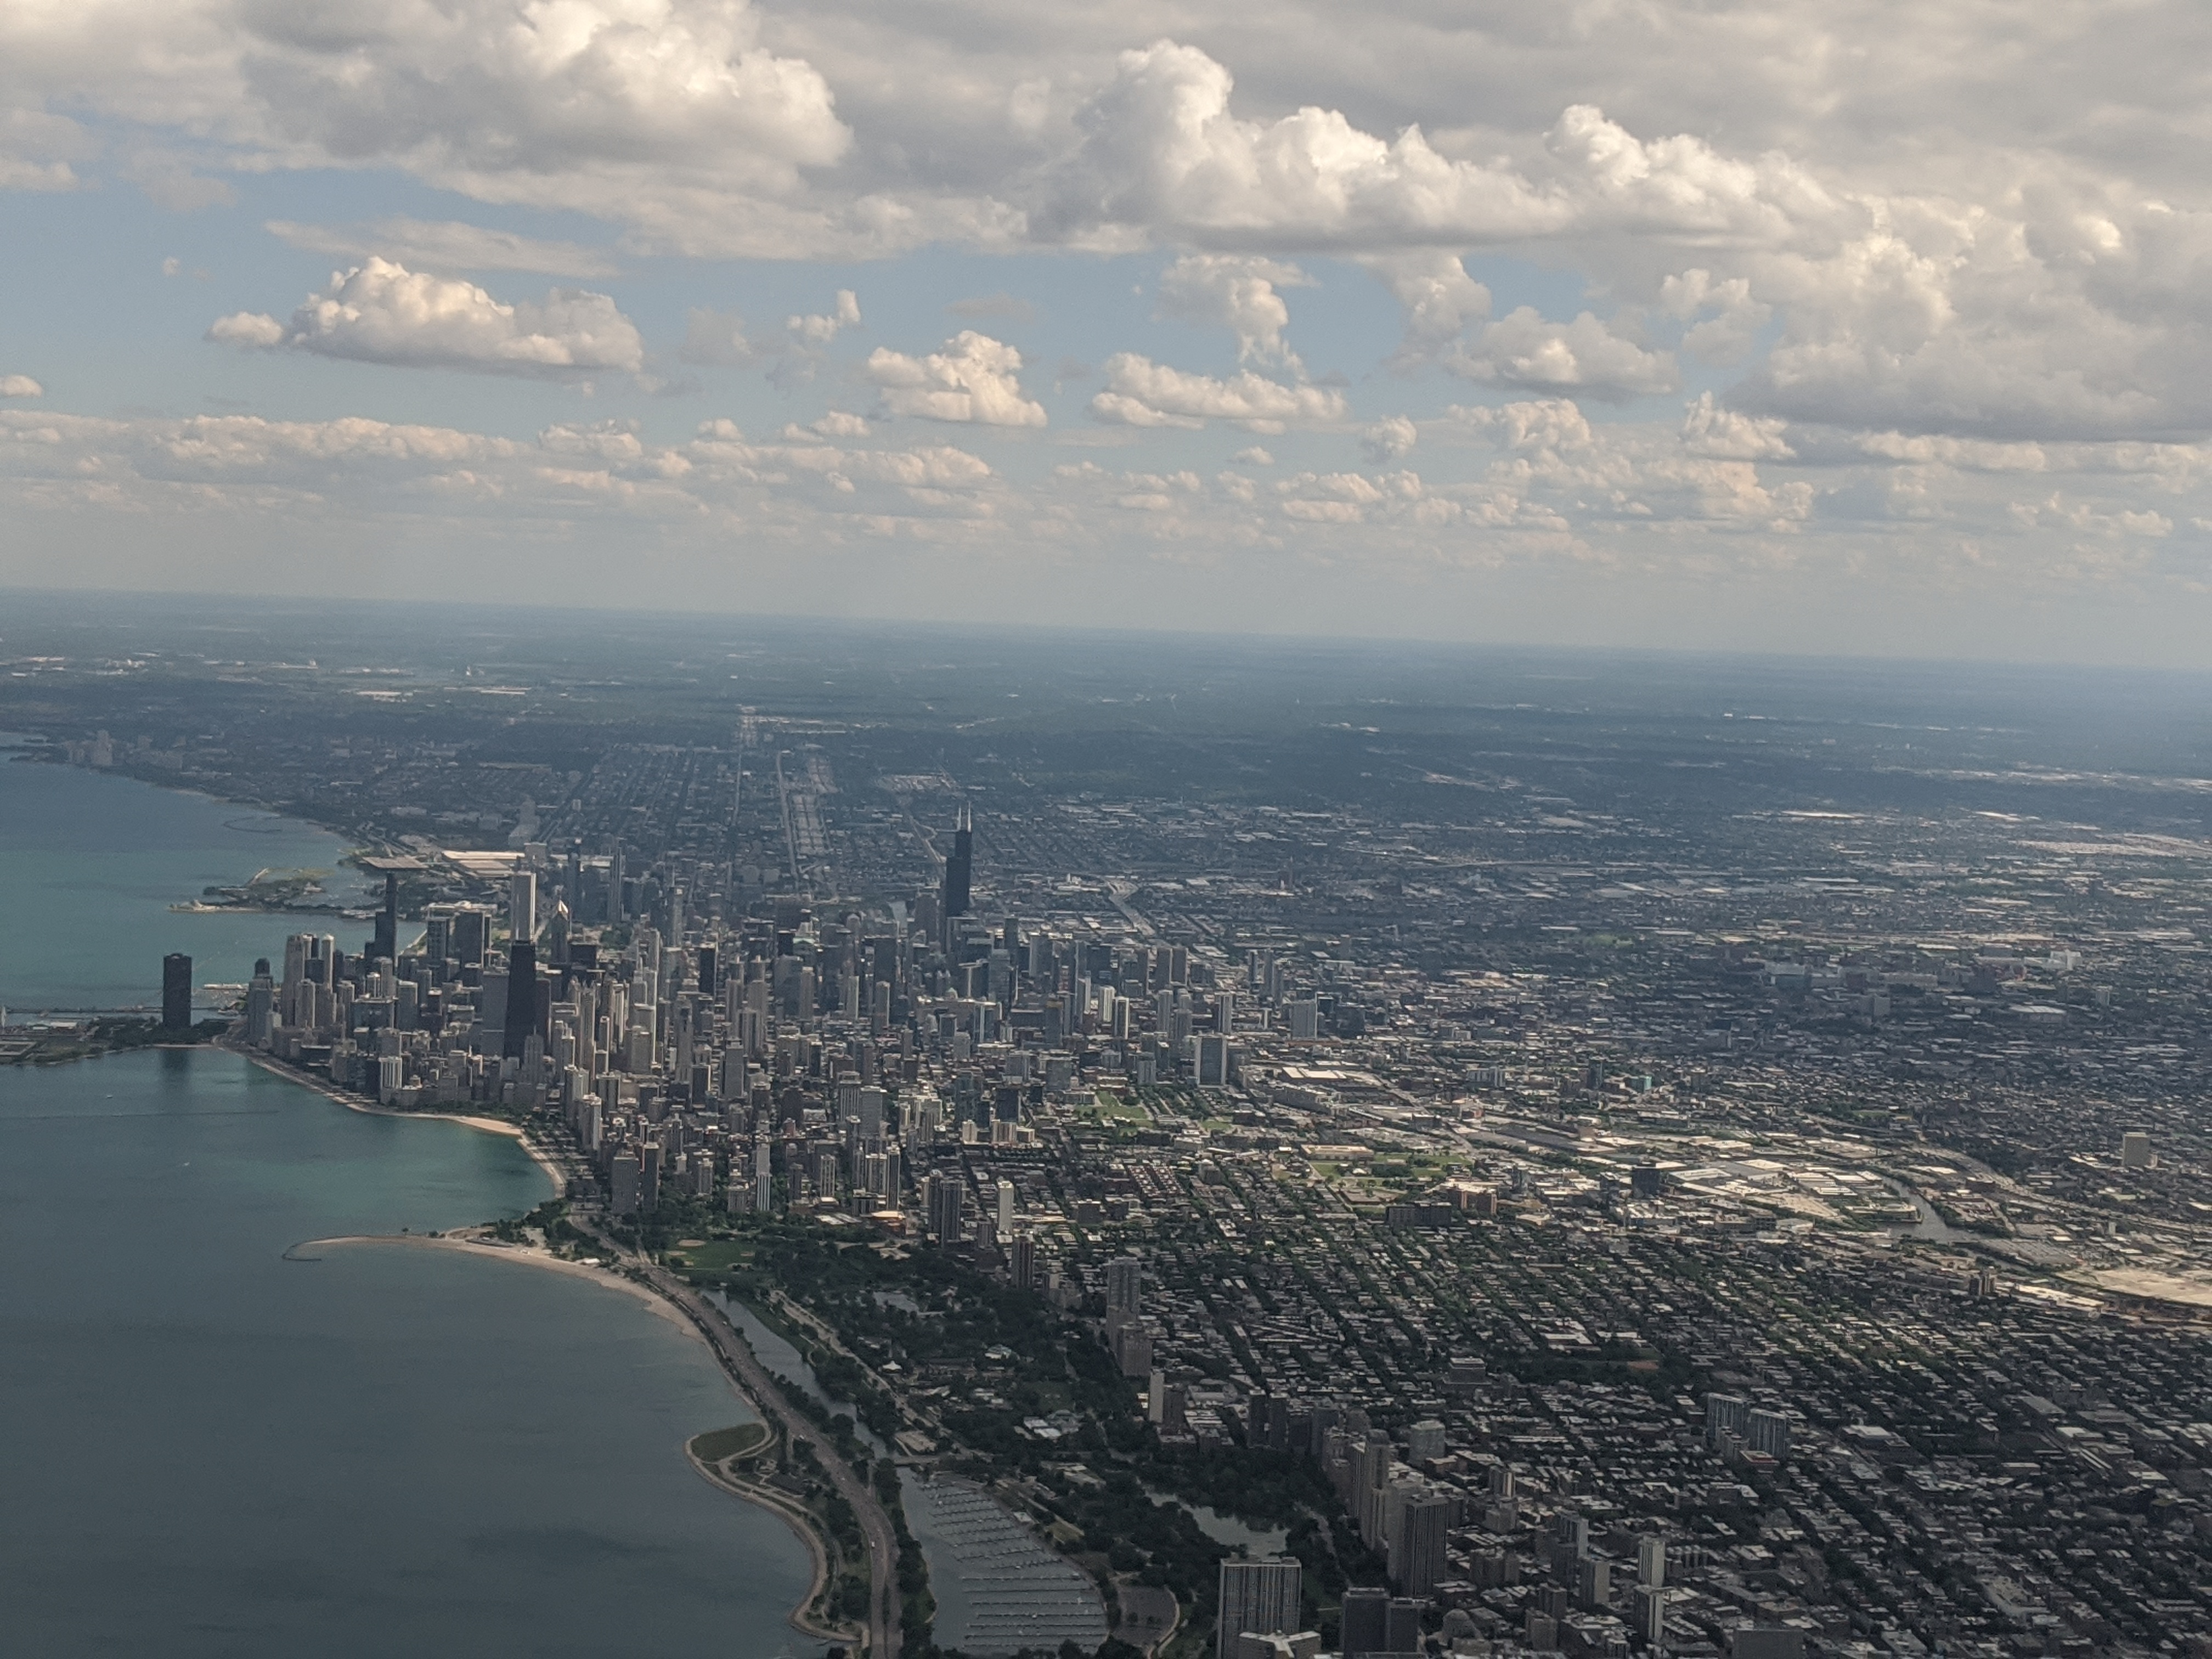 Image of the City of Chicago